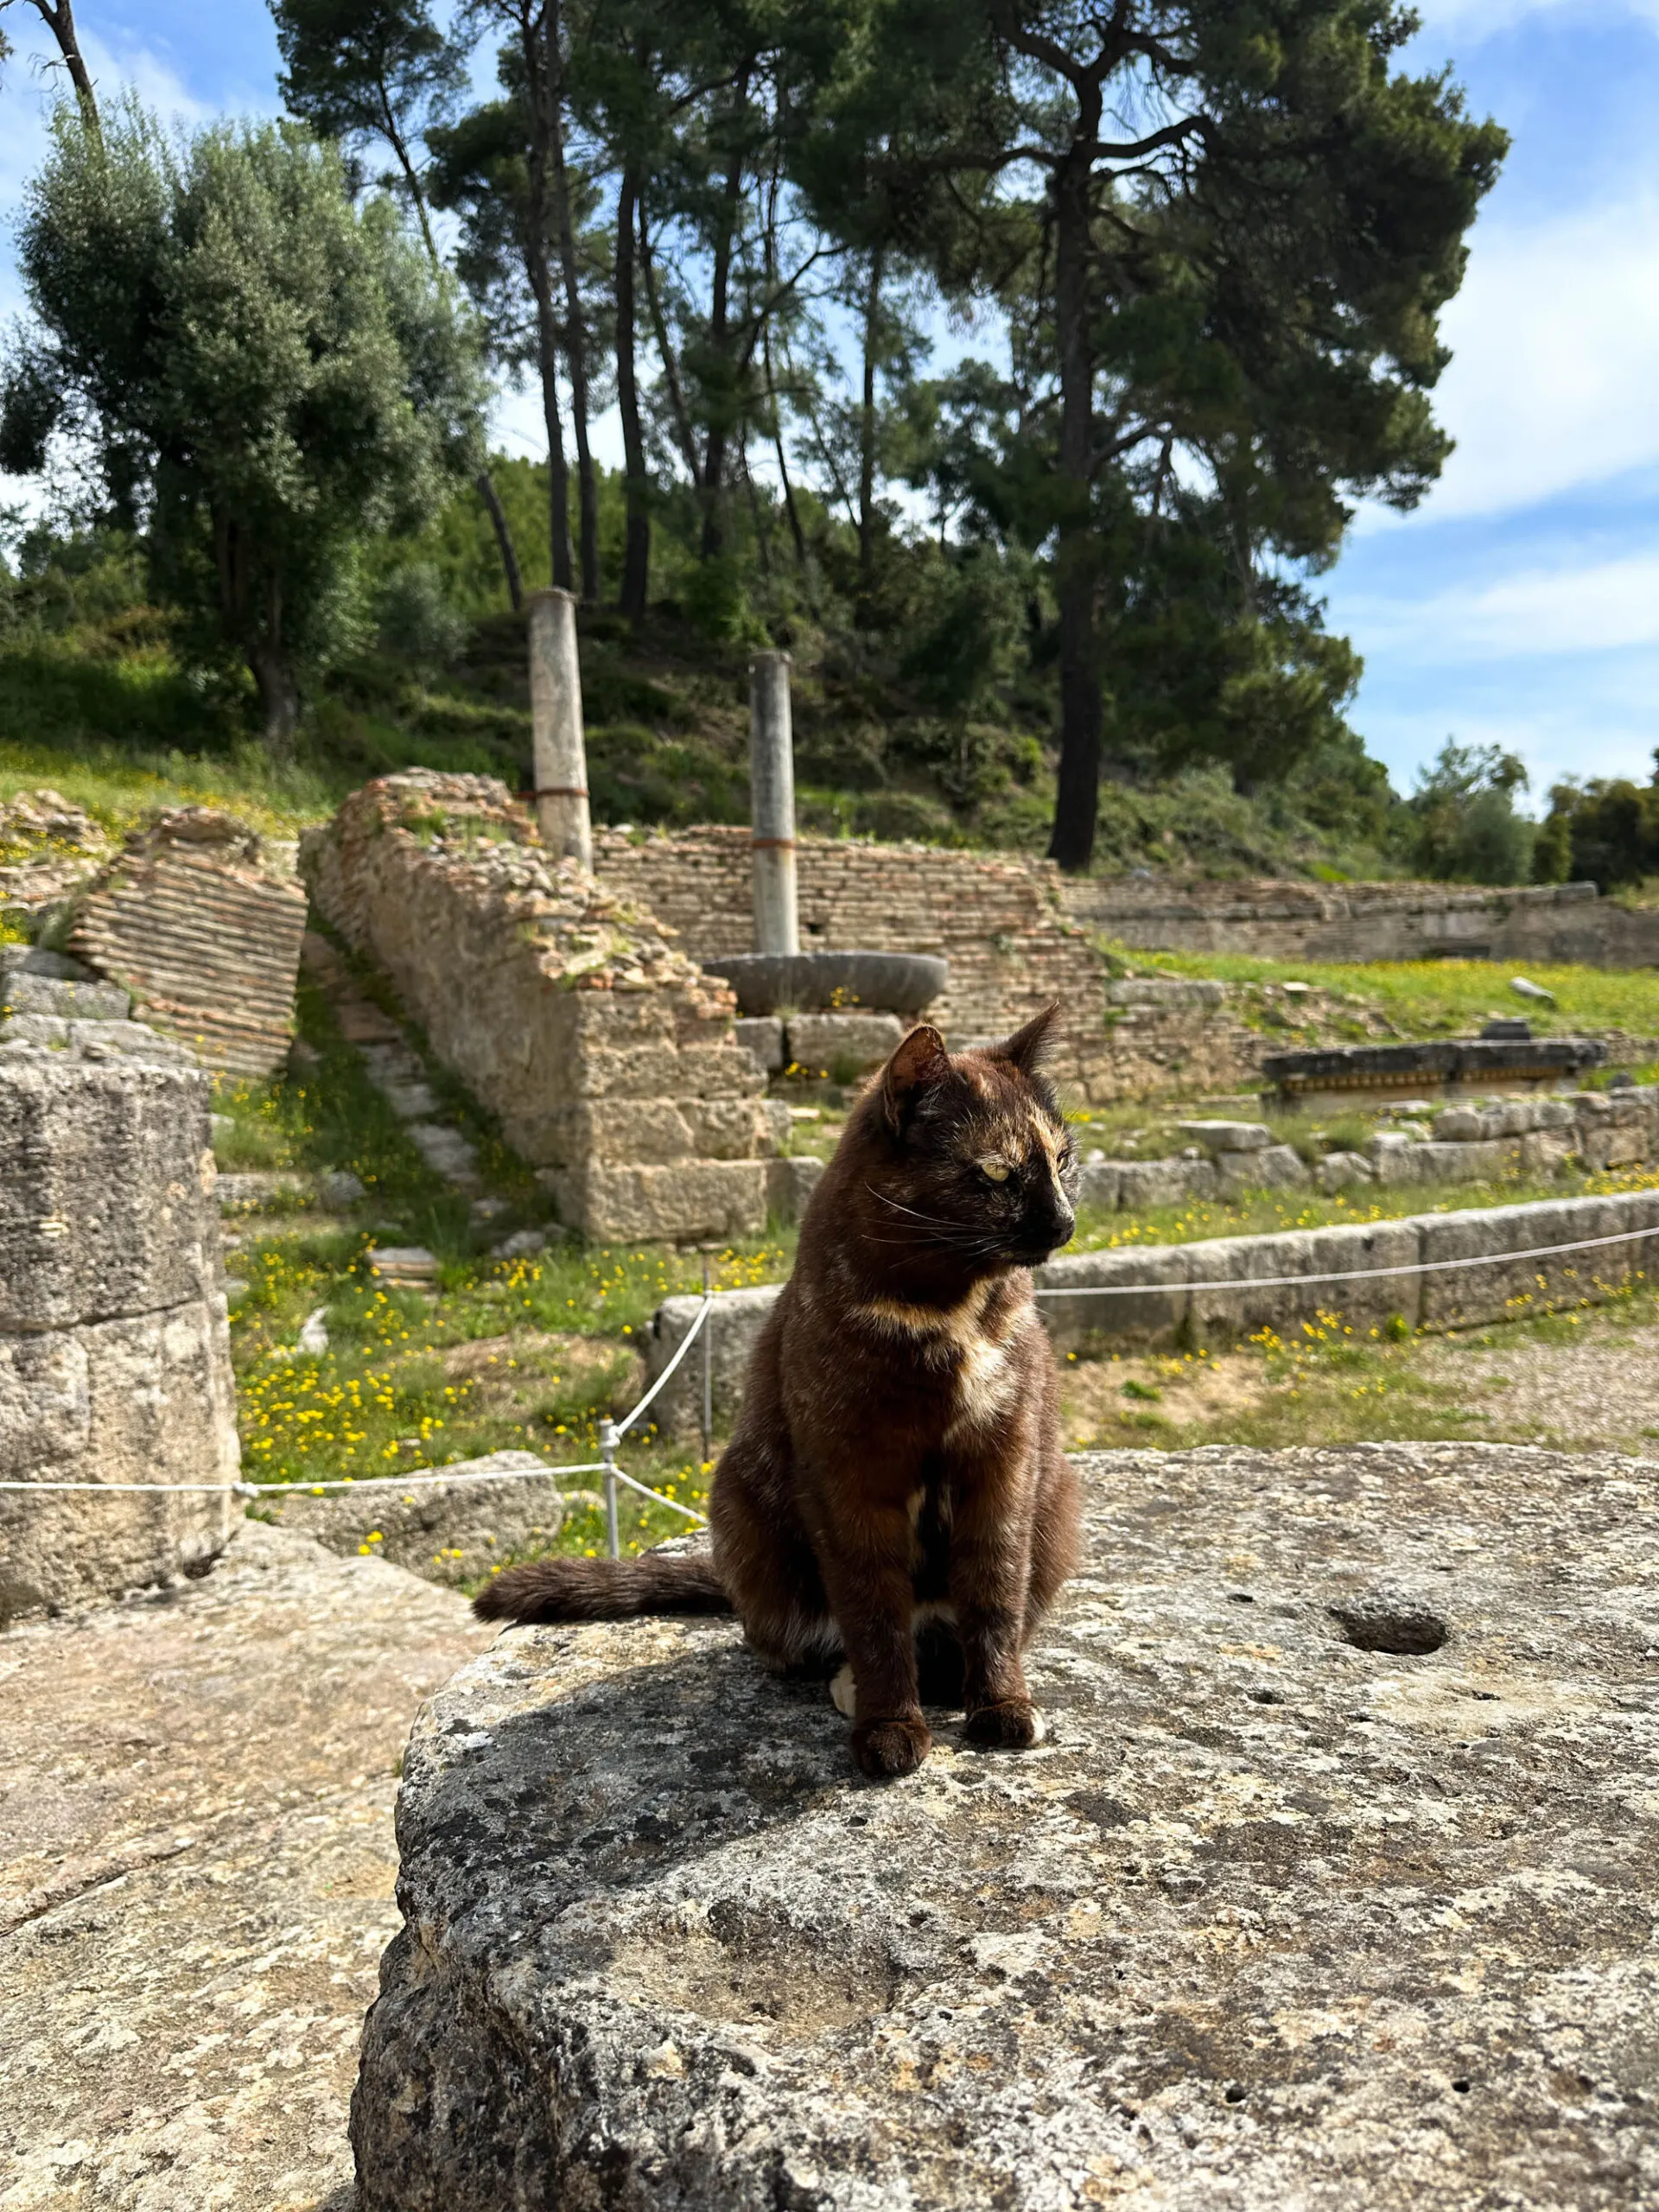 A cat poses on the Temple of Hera in Olympia.